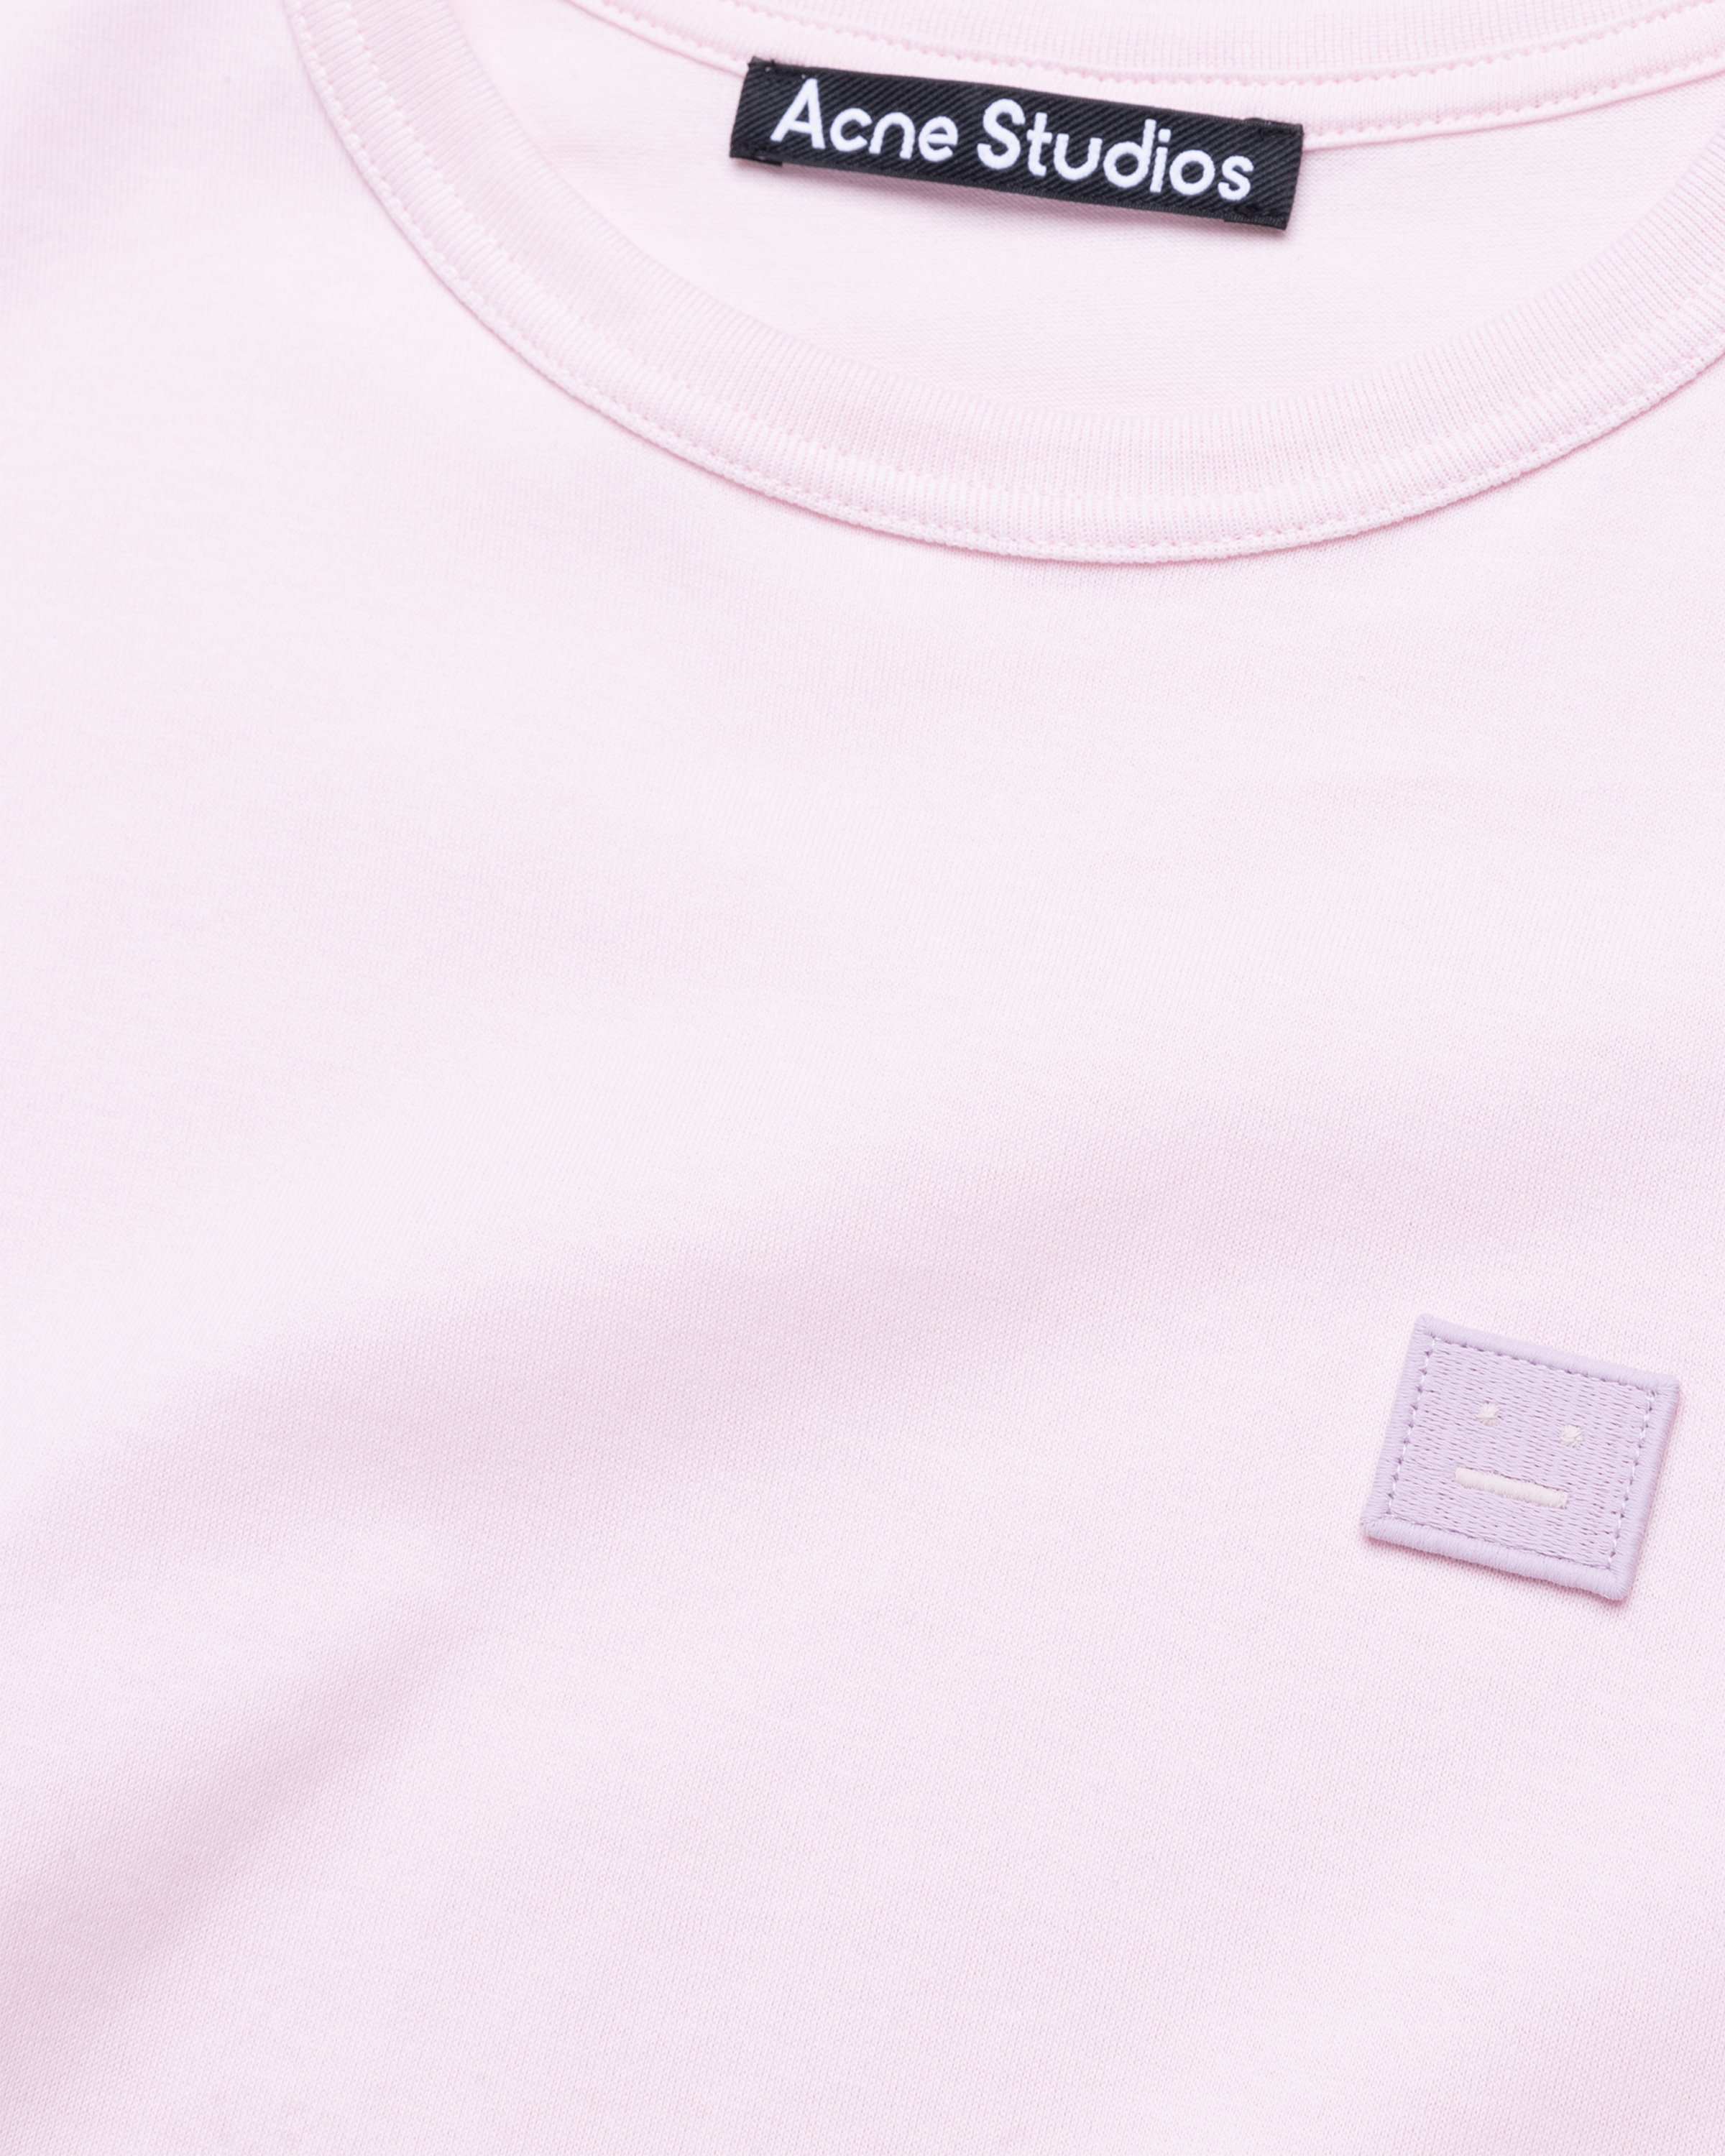 Acne Studios - Fitted Crewneck T-Shirt Light Pink - Clothing - Pink - Image 5